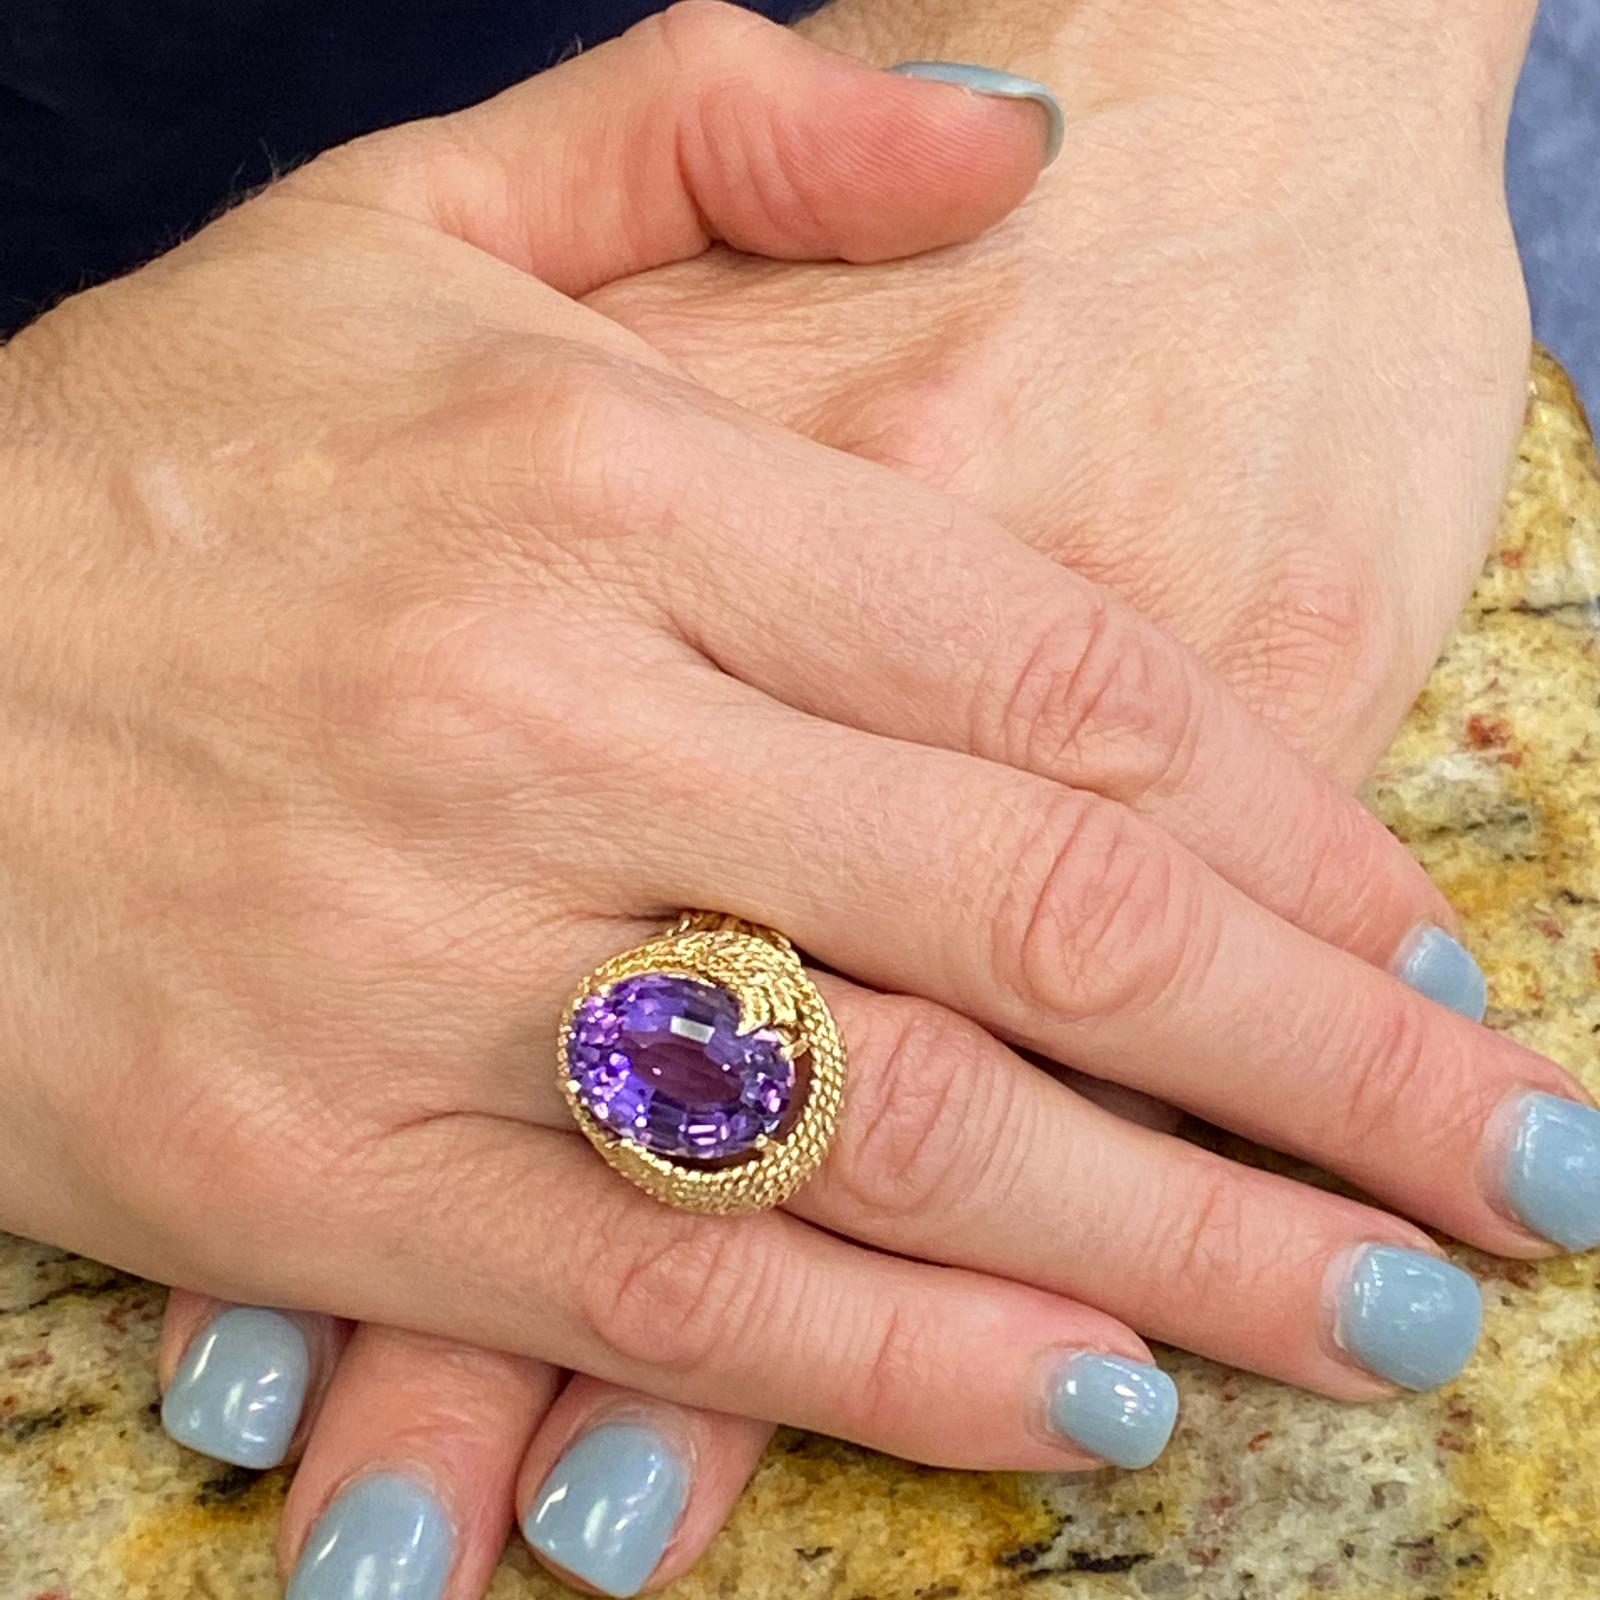 Vintage amethyst ring handcrafted in 14 karat yellow gold. The ring features an approximatey 7.0 carat amethyst gemstone set in a rope textured yellow gold mounting. The amethyst measures 12 x 16mm, and the ring is currently size 7 (can be sized). 